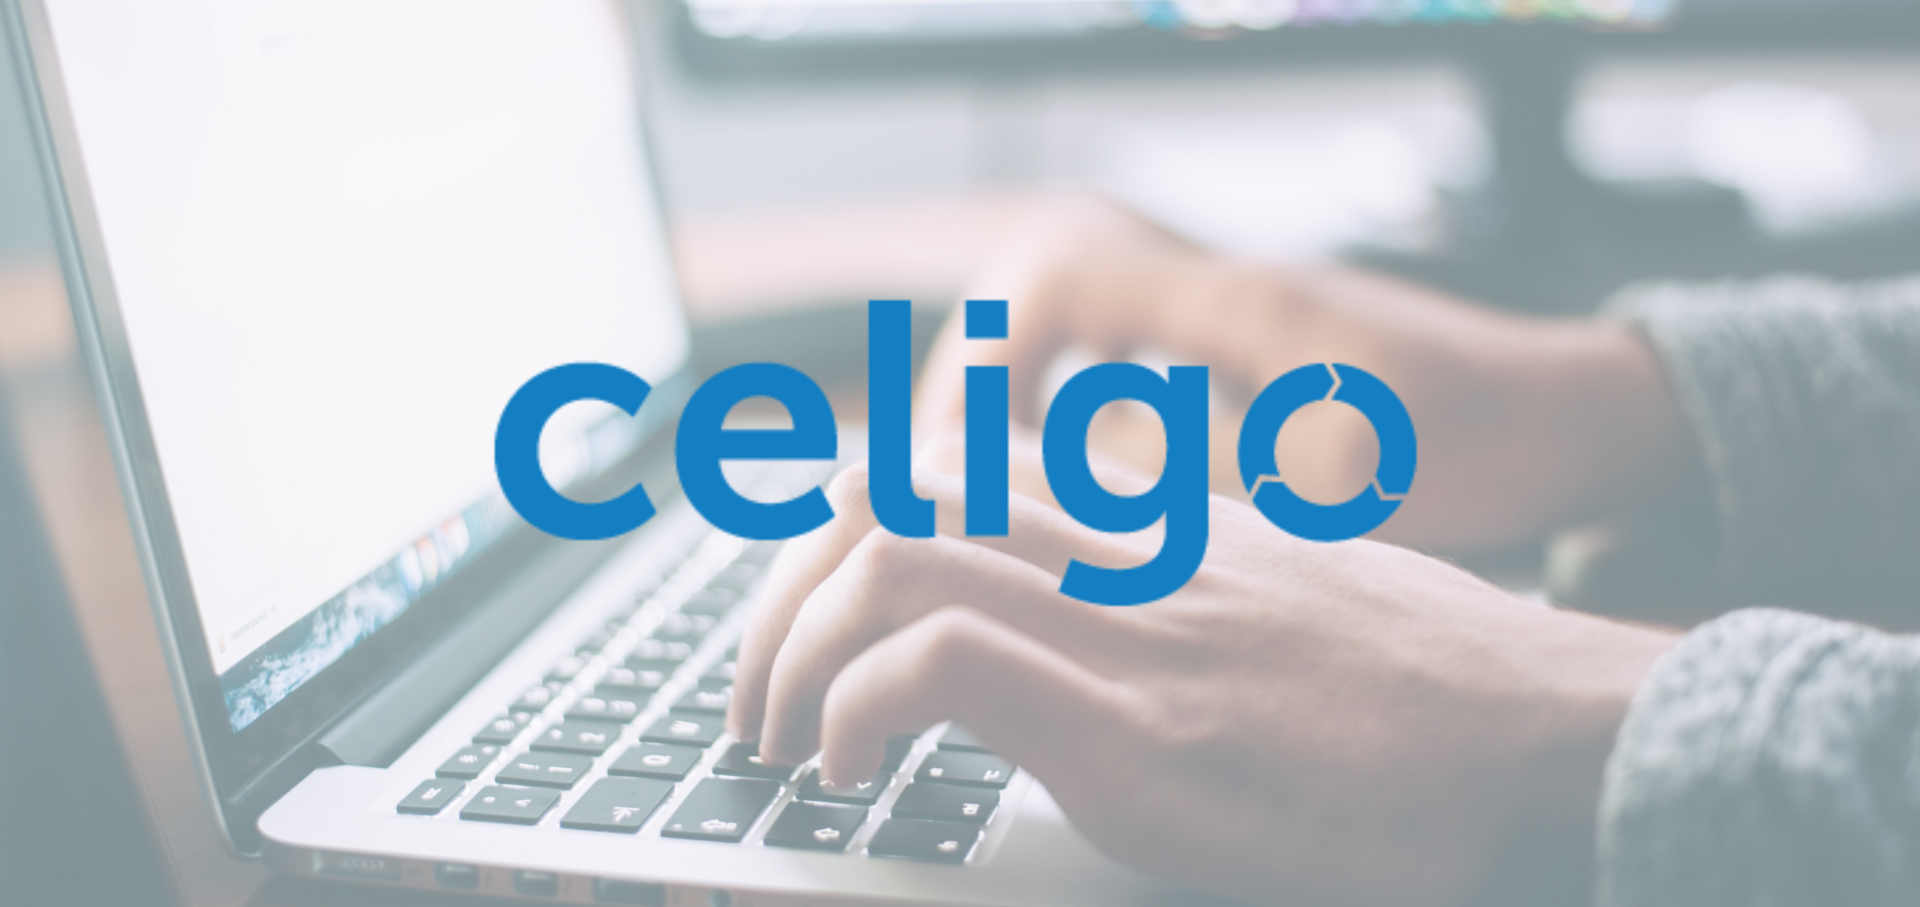 Celigo's rotational trainee program helps bring new talent into the team and help them grow to be leaders.